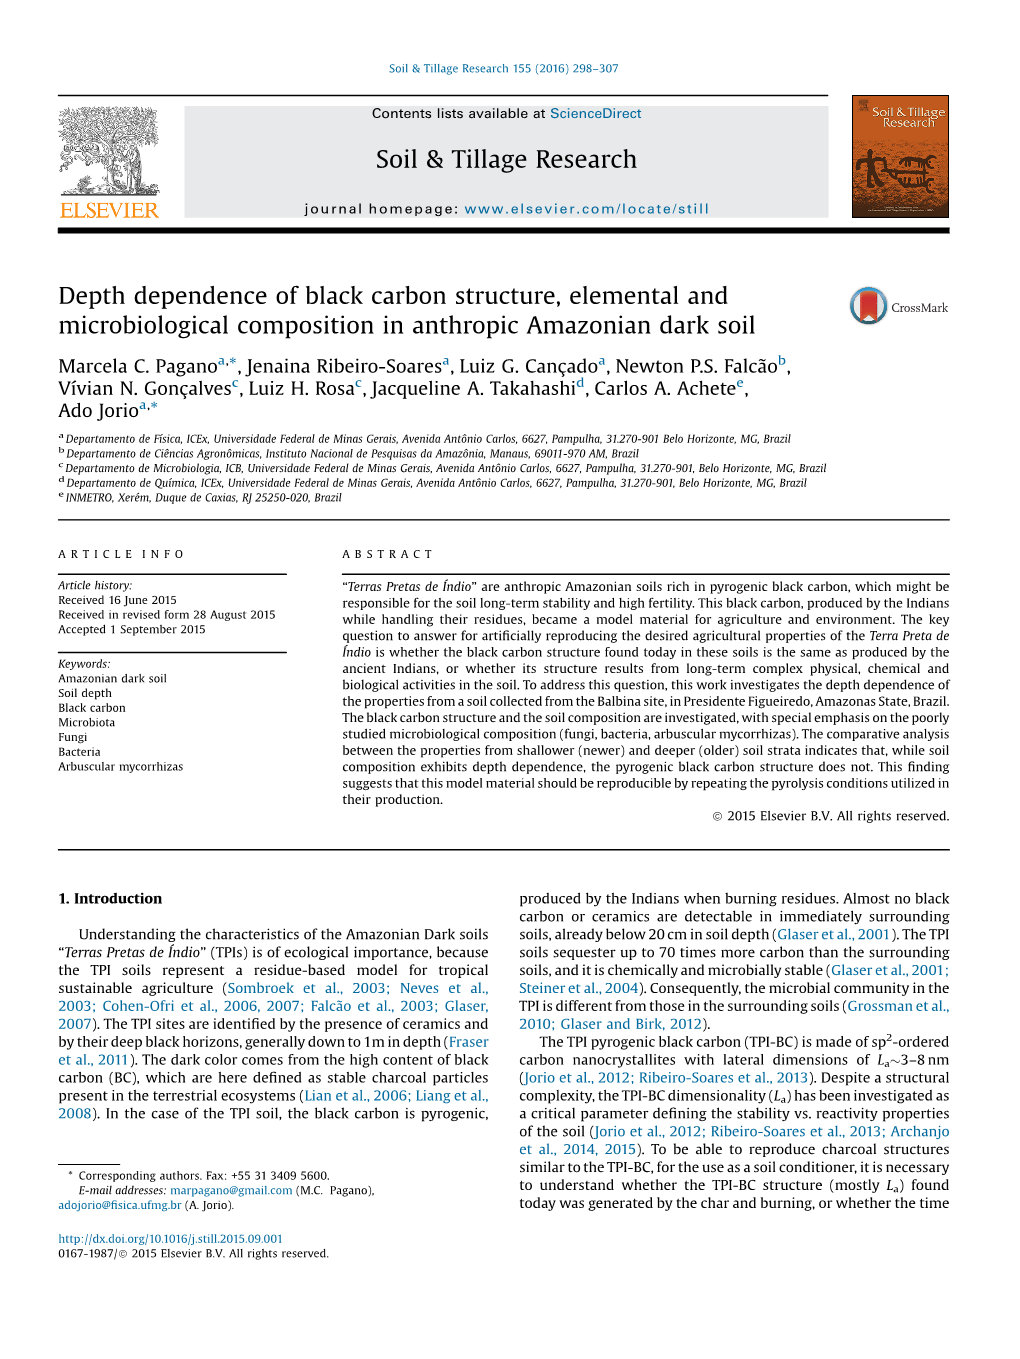 Depth Dependence of Black Carbon Structure, Elemental And